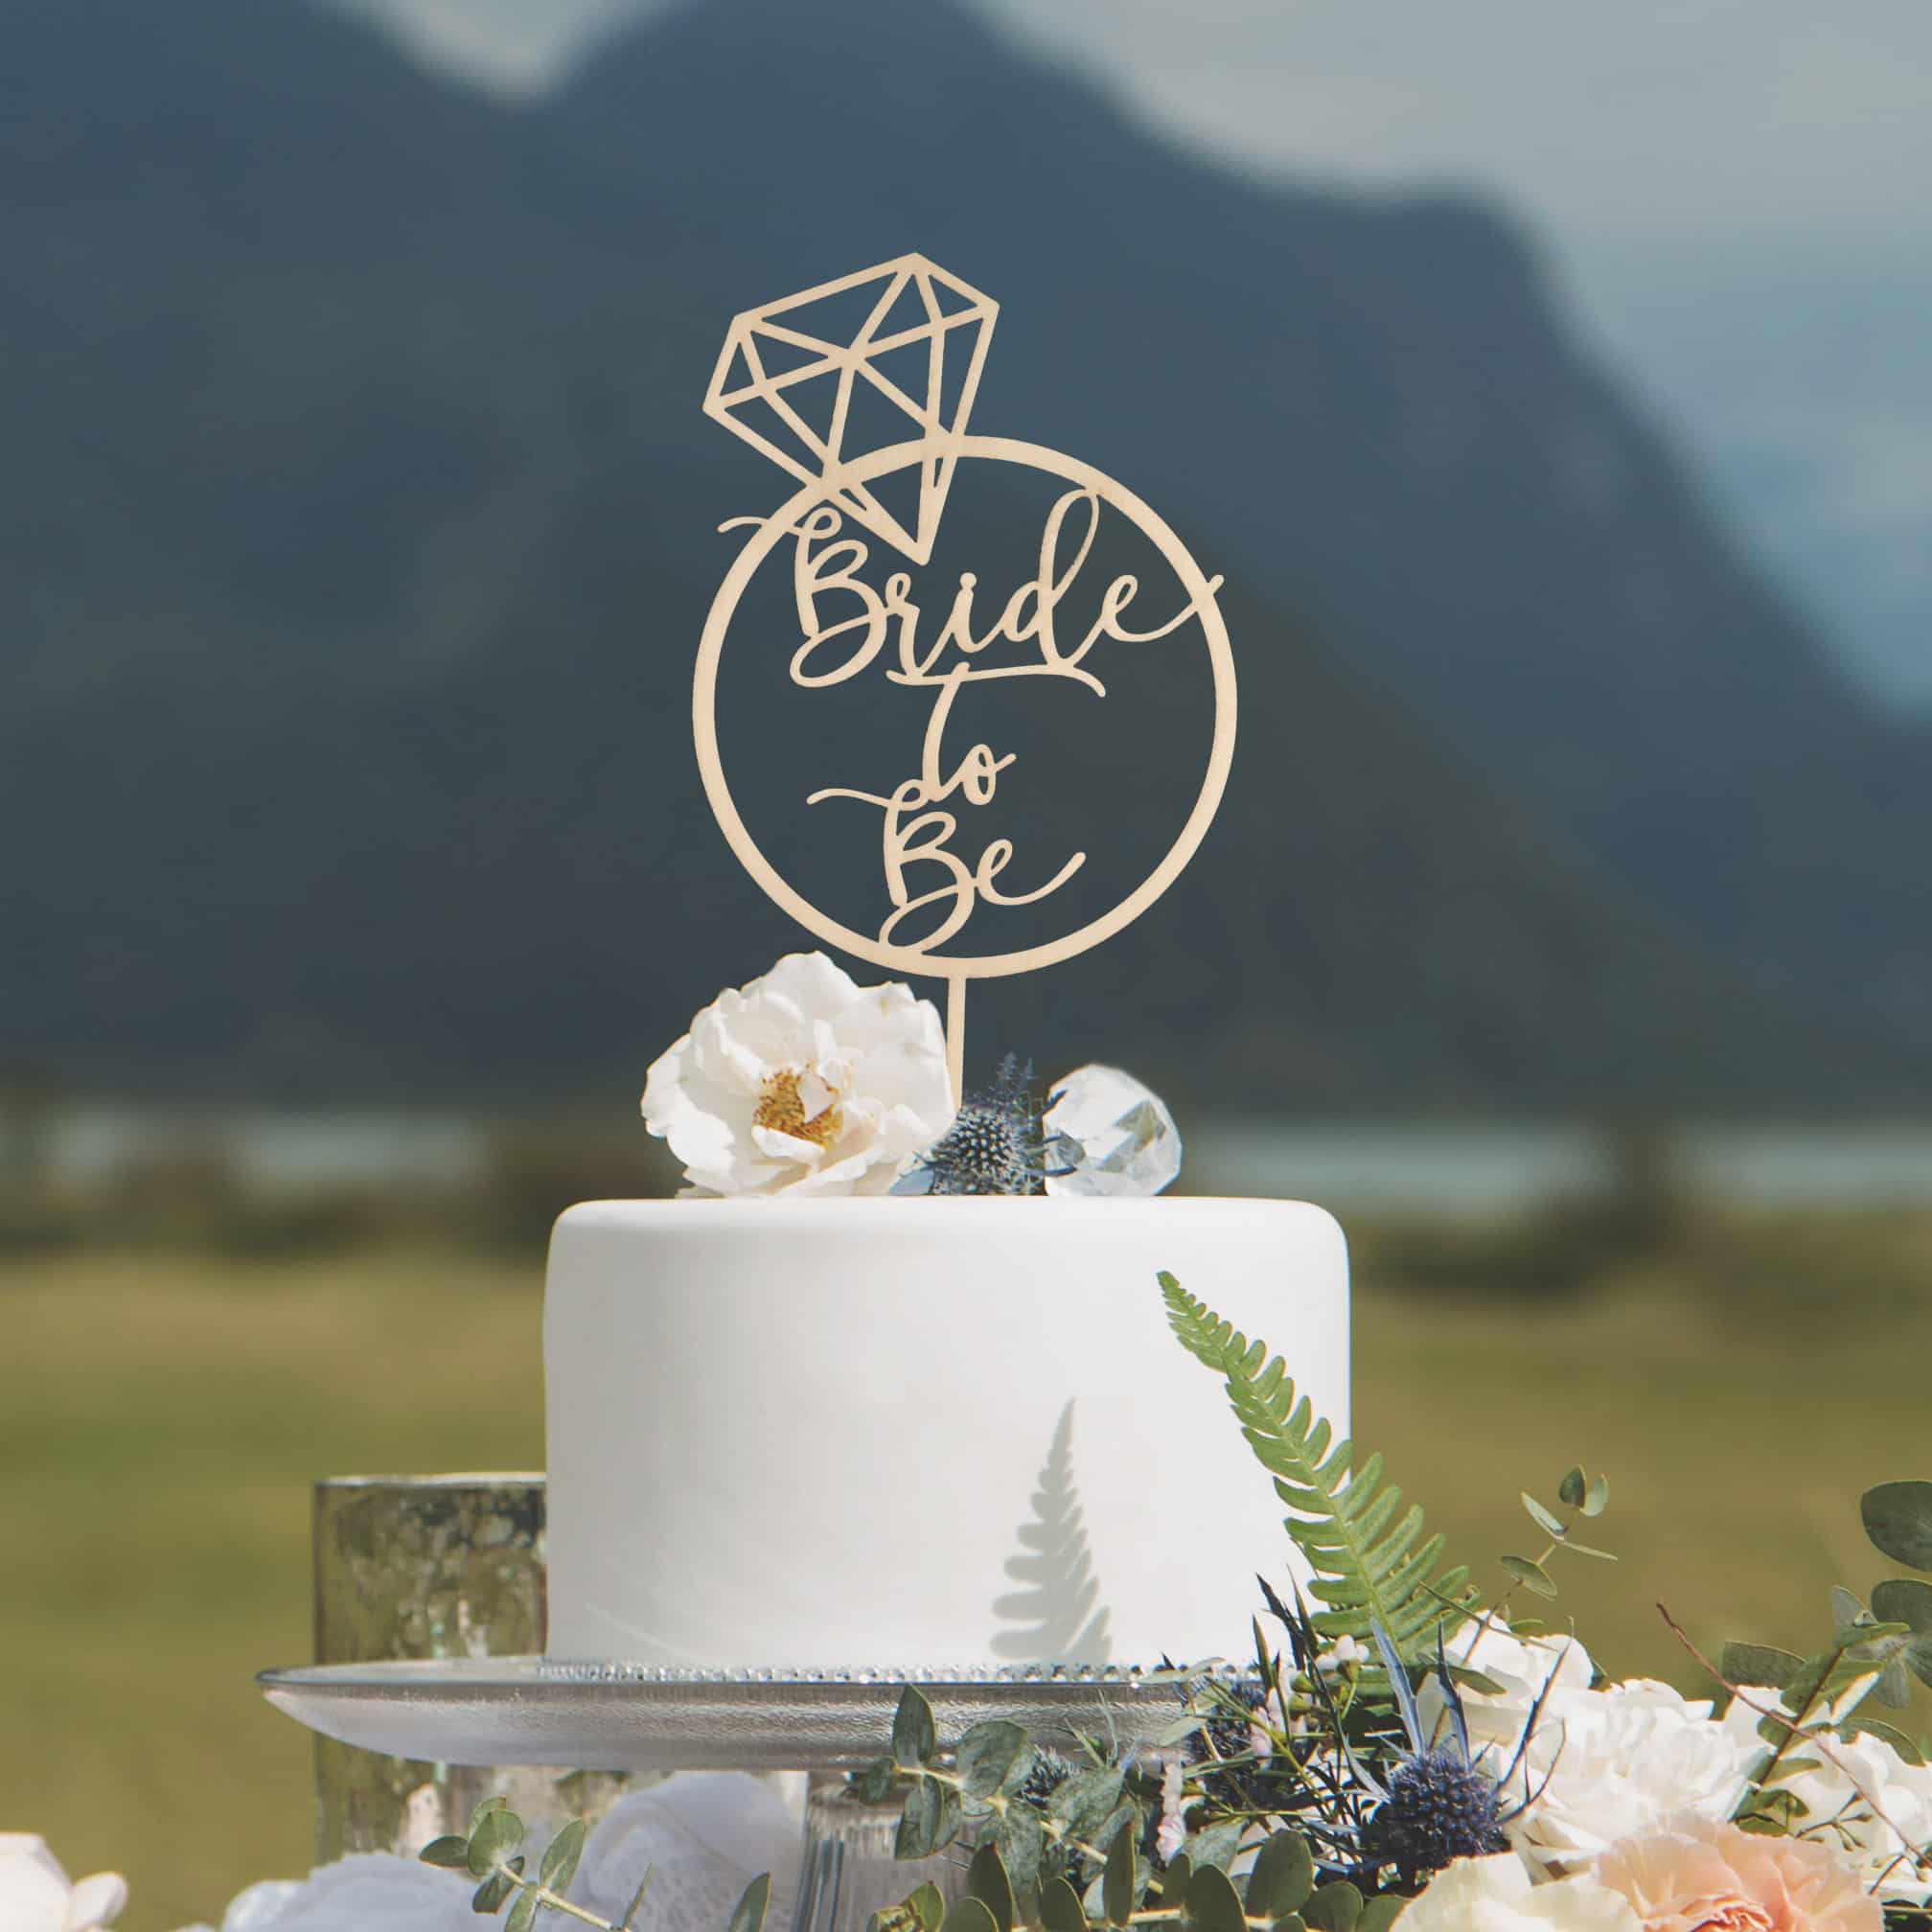 Bride to be Cake Topper: A Bridal Shower Must